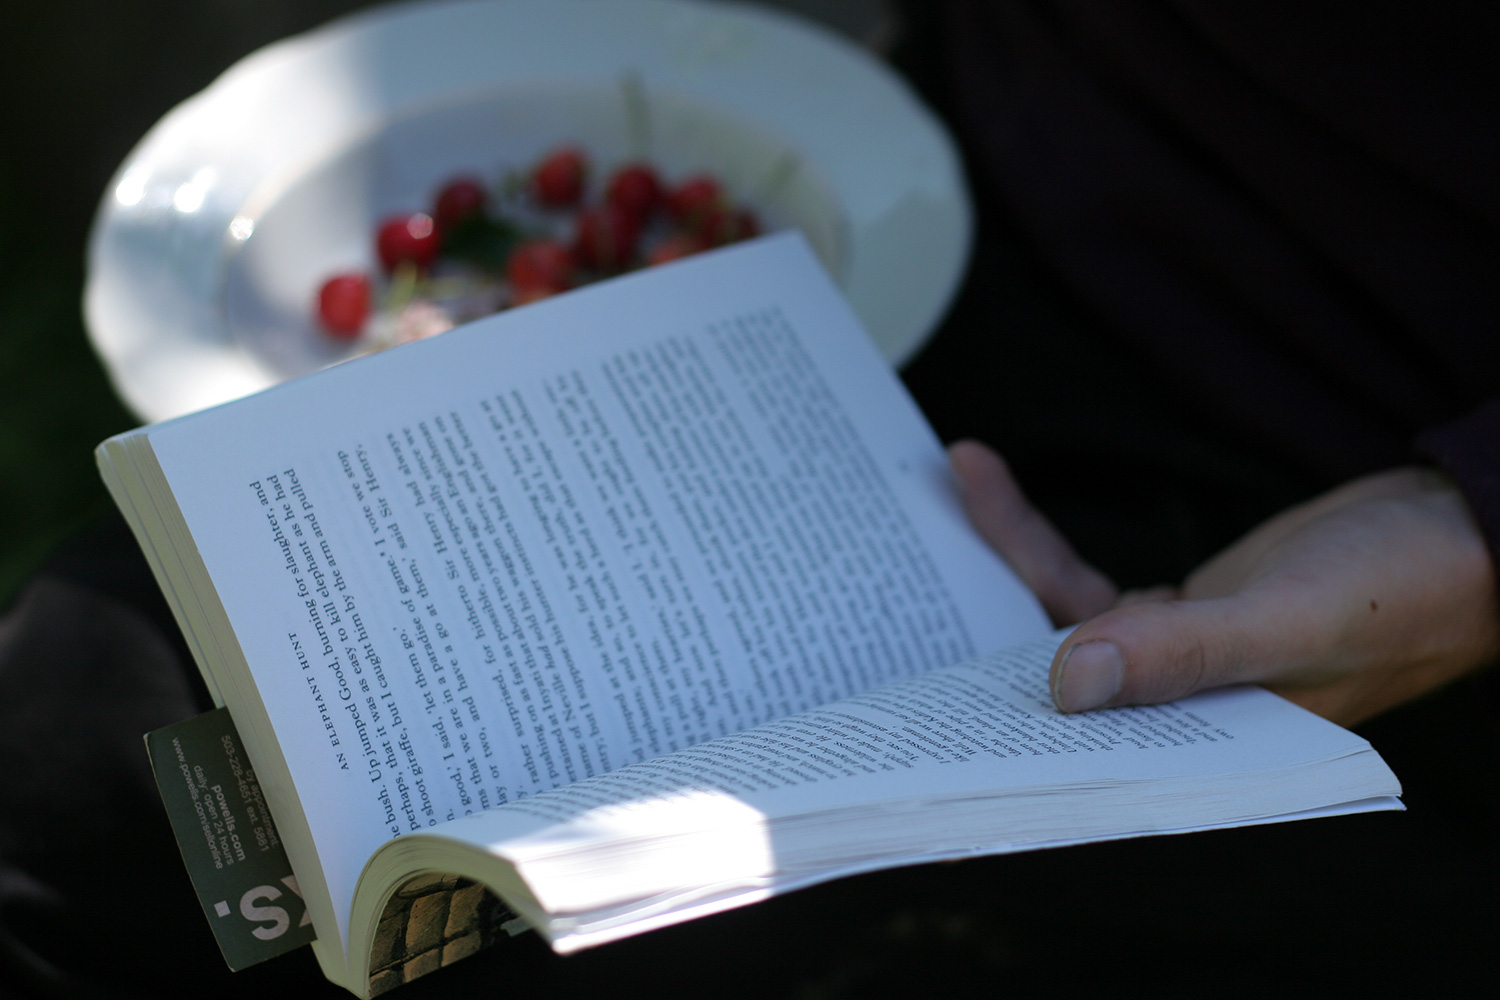 cherries and reading